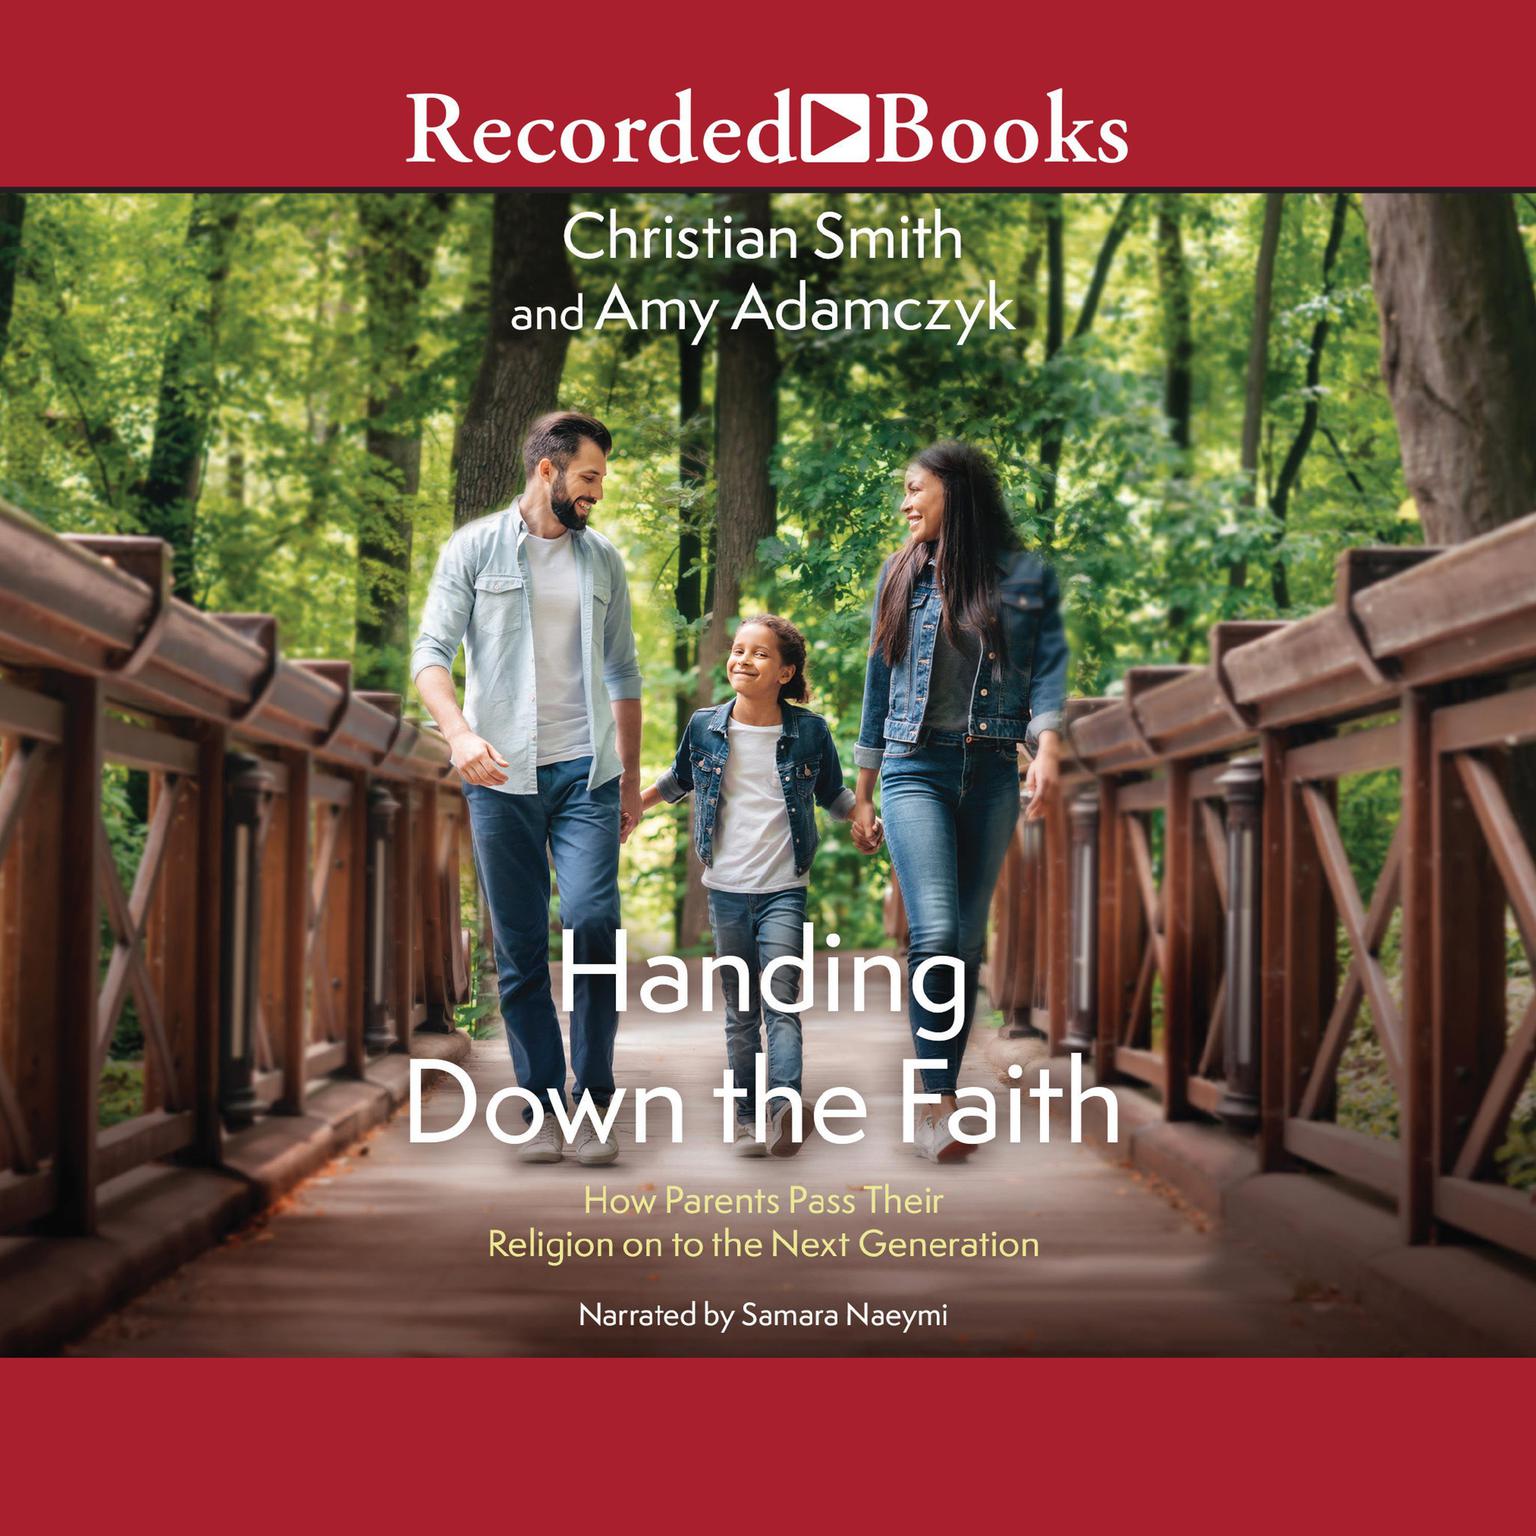 Handing Down the Faith: How Parents Pass Their Religion on to the Next Generation Audiobook, by Christian Smith